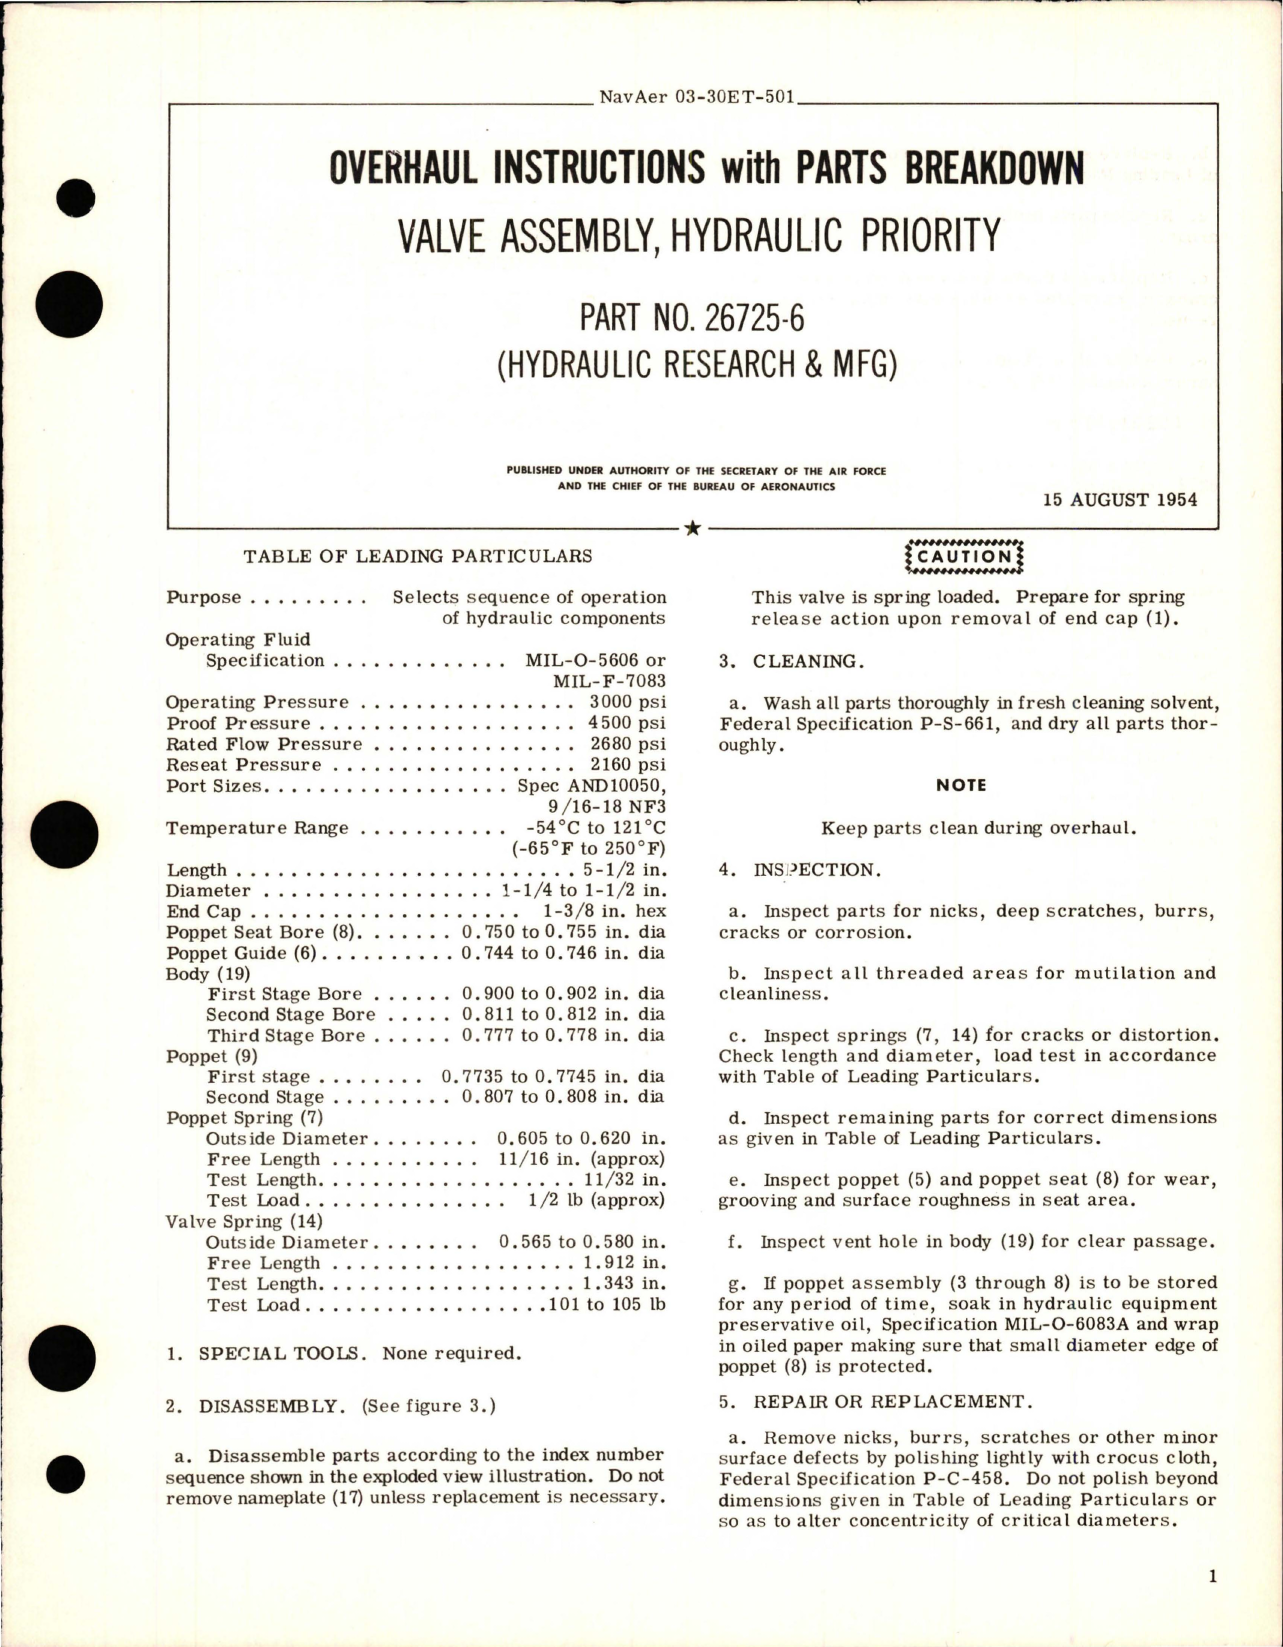 Sample page 1 from AirCorps Library document: Overhaul Instructions with Parts for Hydraulic Priority Valve Assembly - Part 26725-6 